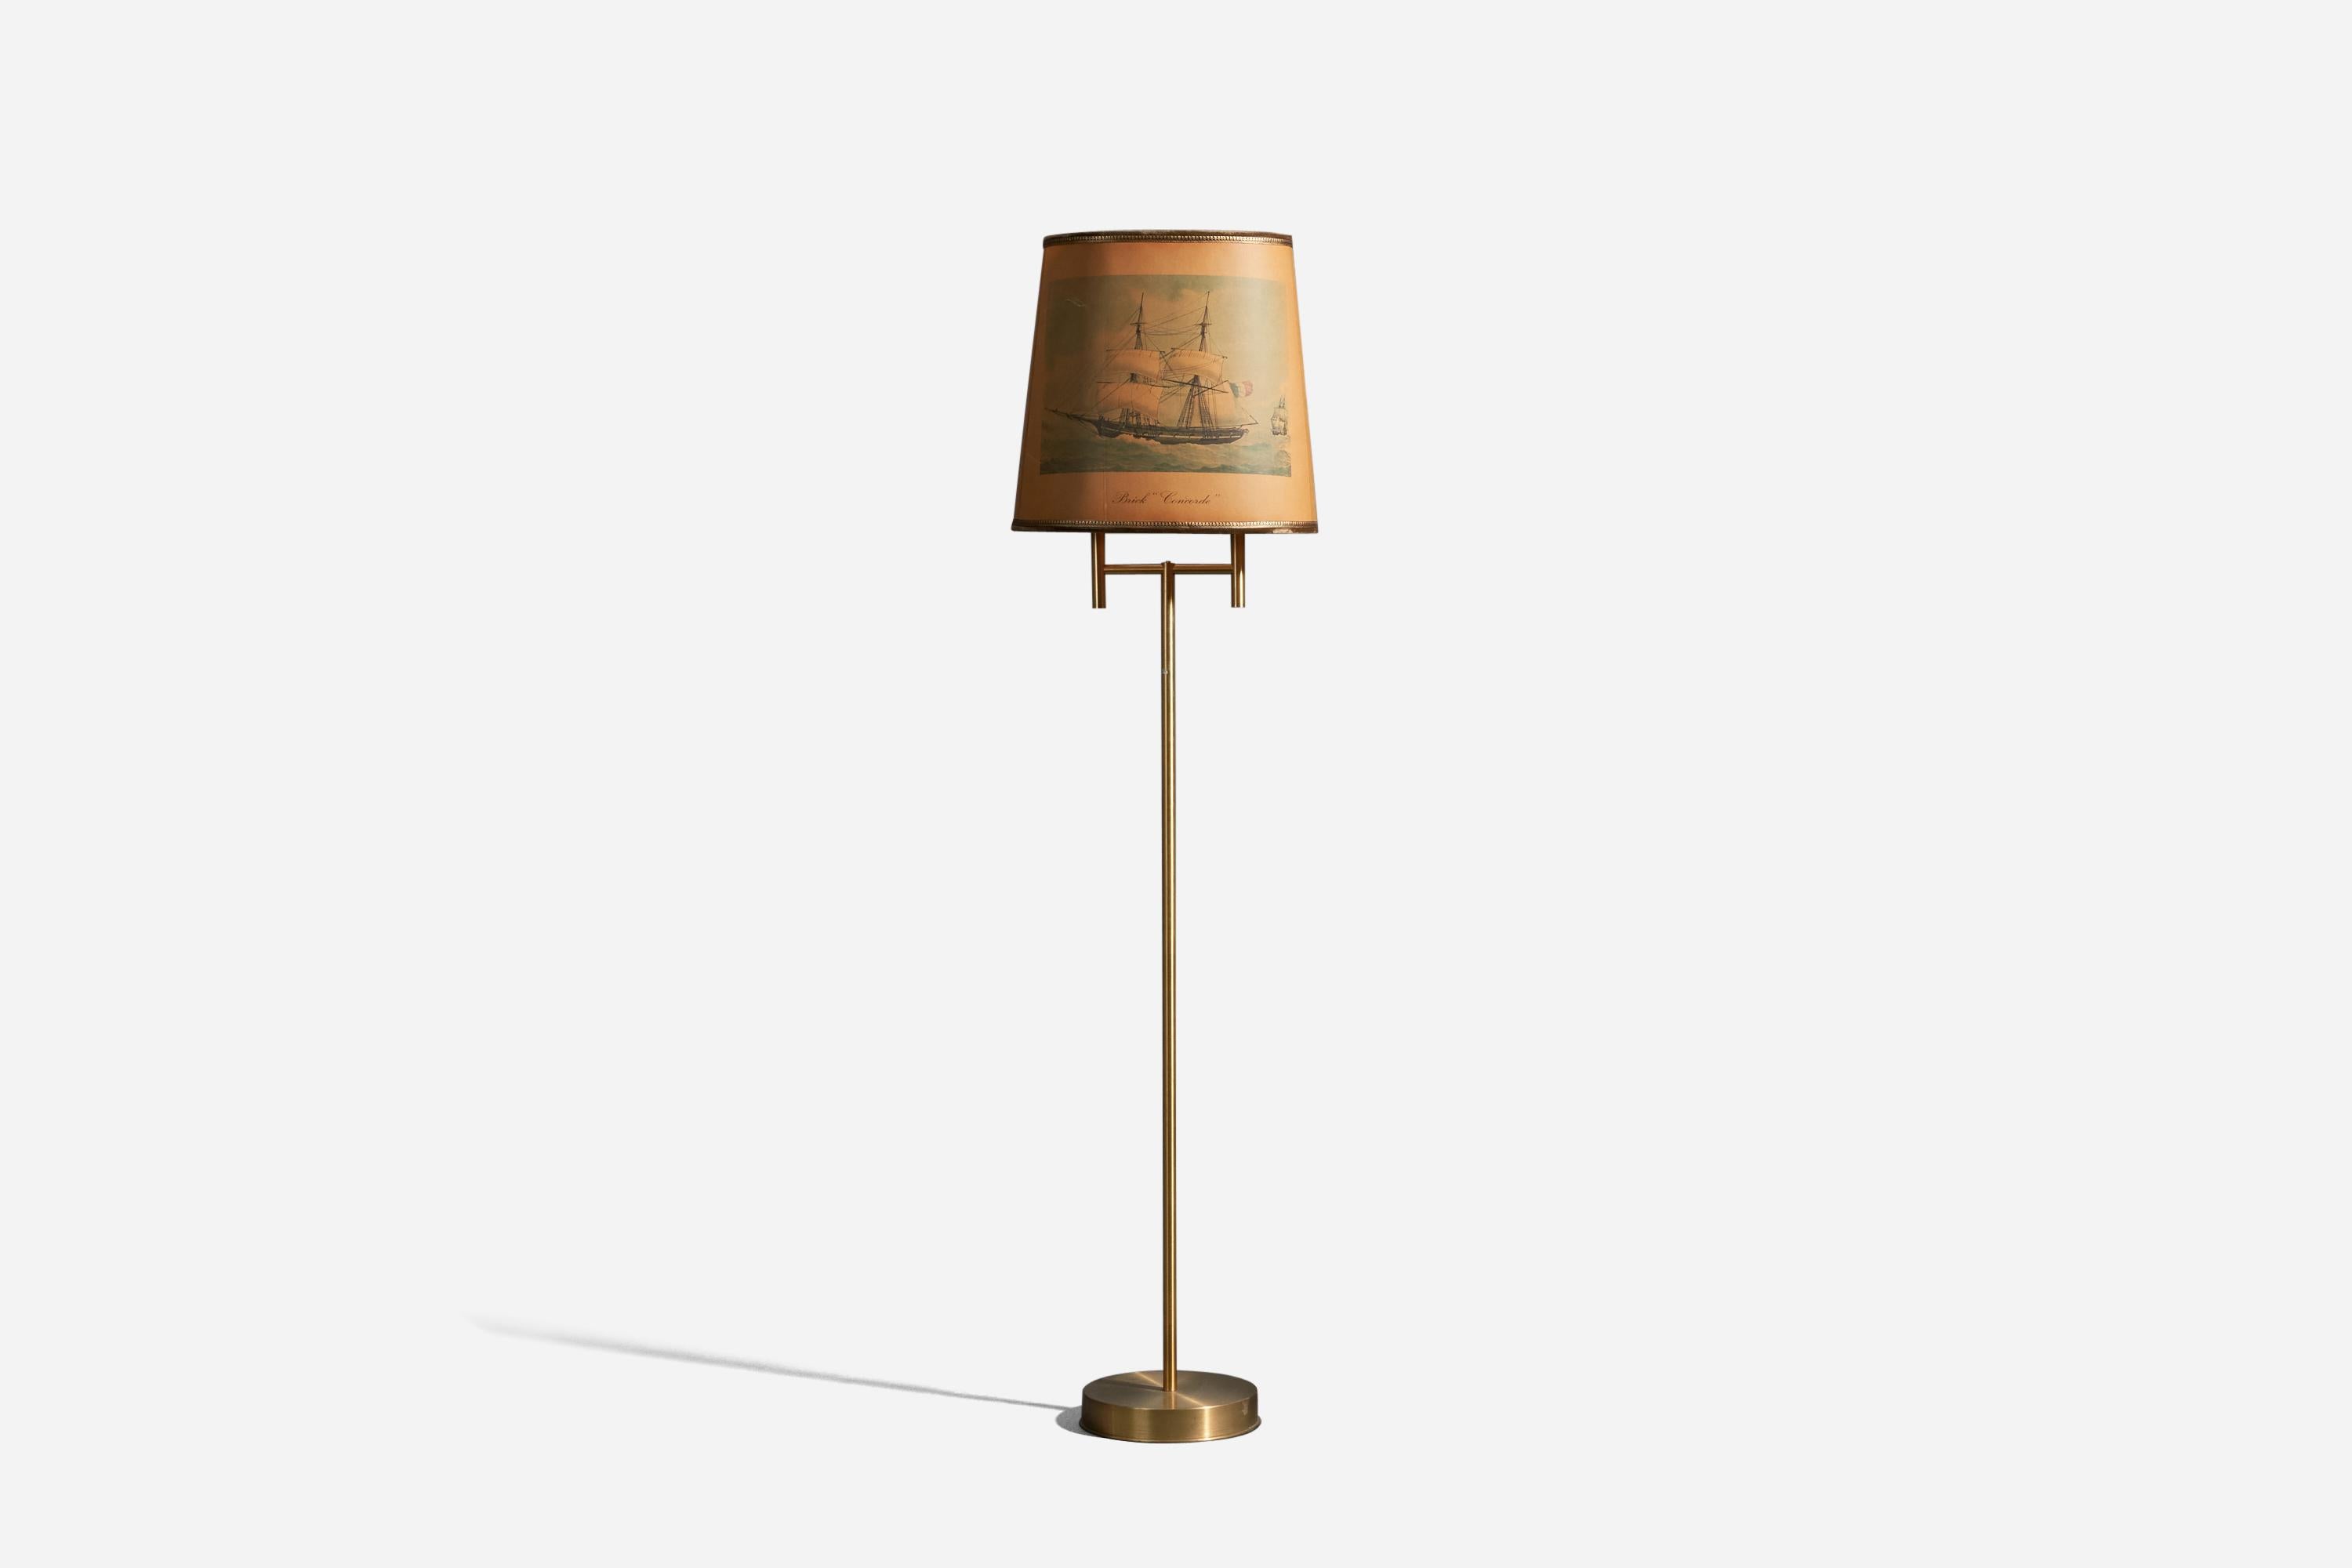 A brass and paper floor lamp designed and produced in Finland, 1960s.

Sold with lampshade. Dimensions stated are of floor lamp with lampshade. 

Sockets take standard E-26 medium base bulbs.

There is no maximum wattage stated on the fixture.